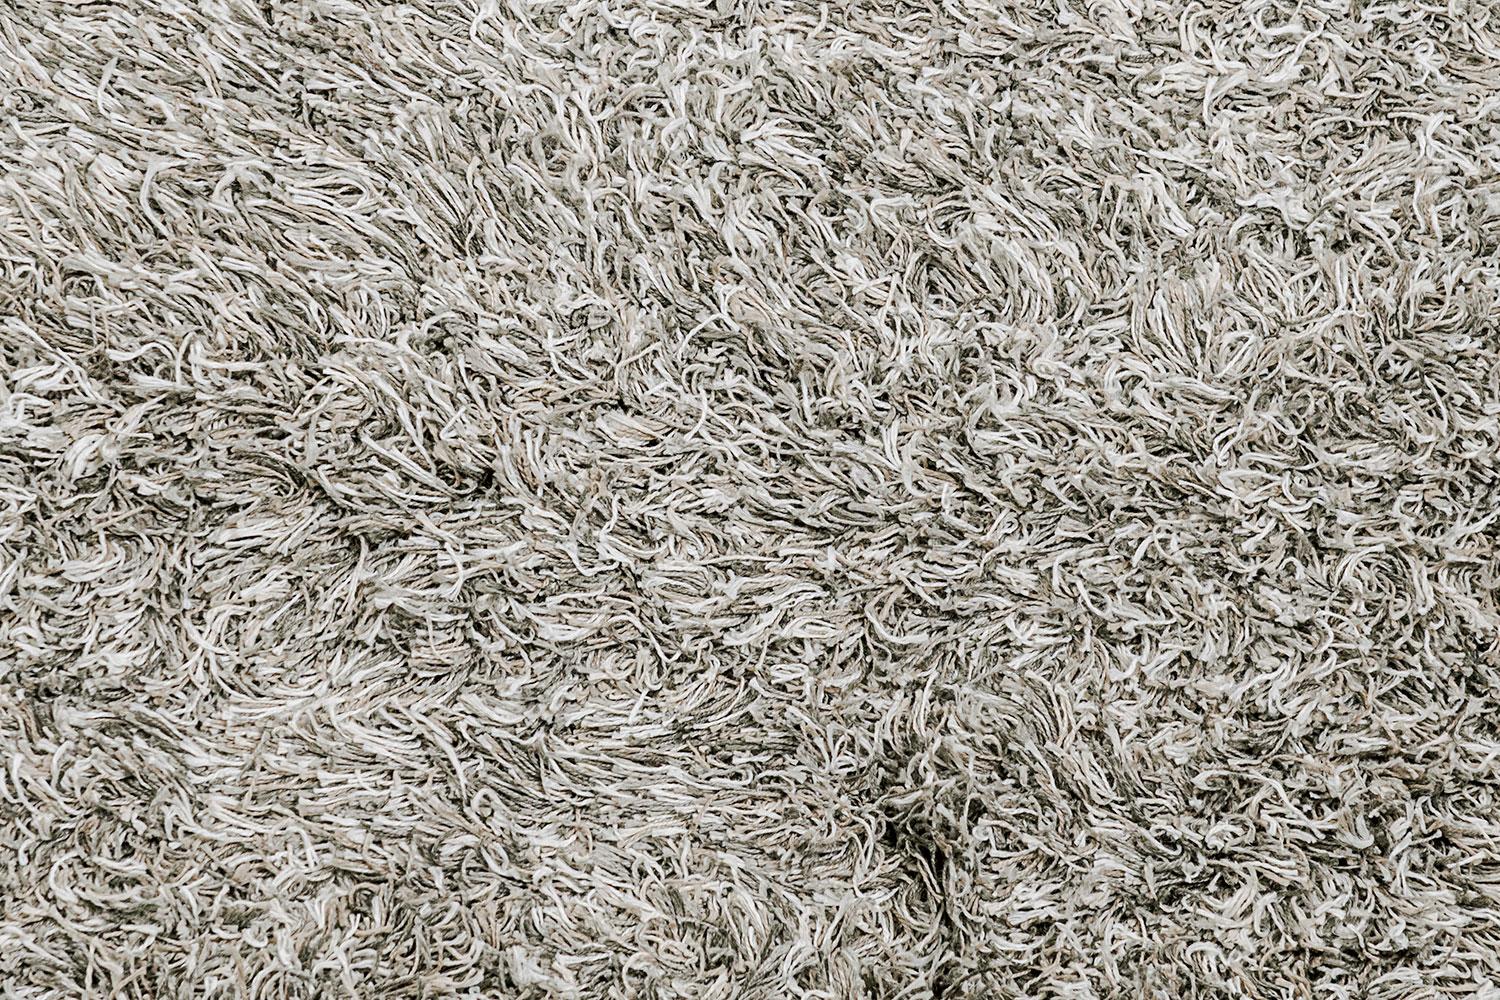 Fogg Grey 2 Rug

This rug is an elegant pile rug that shimmers in a variety of shoes. The character of the linen yarn and many shades of color give it a beautiful mottled appearance and attractive sheen.

Measure: 8’ x 10’